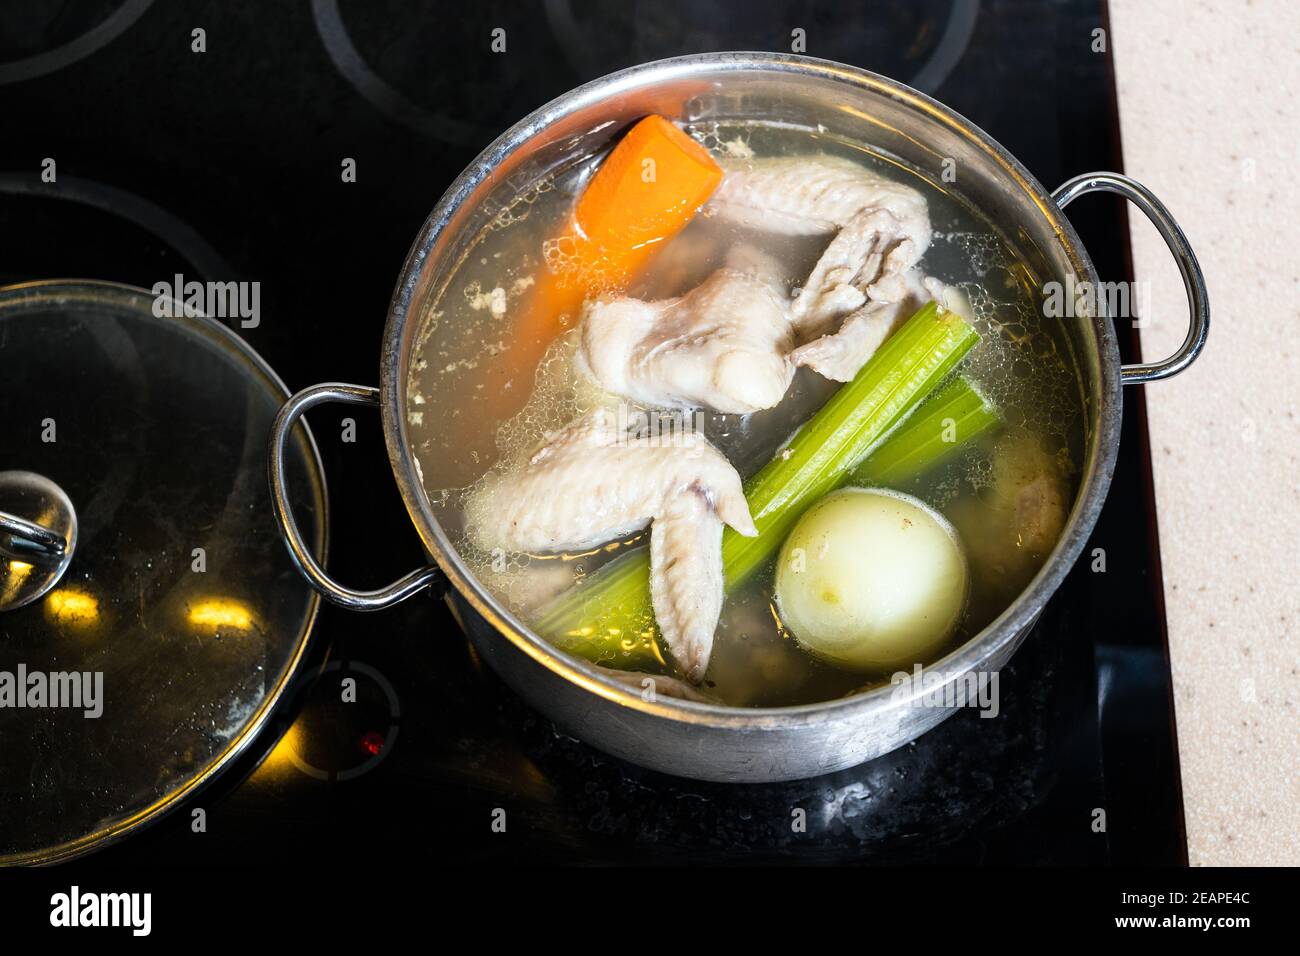 top view of chicken broth in stewpot on stove Stock Photo